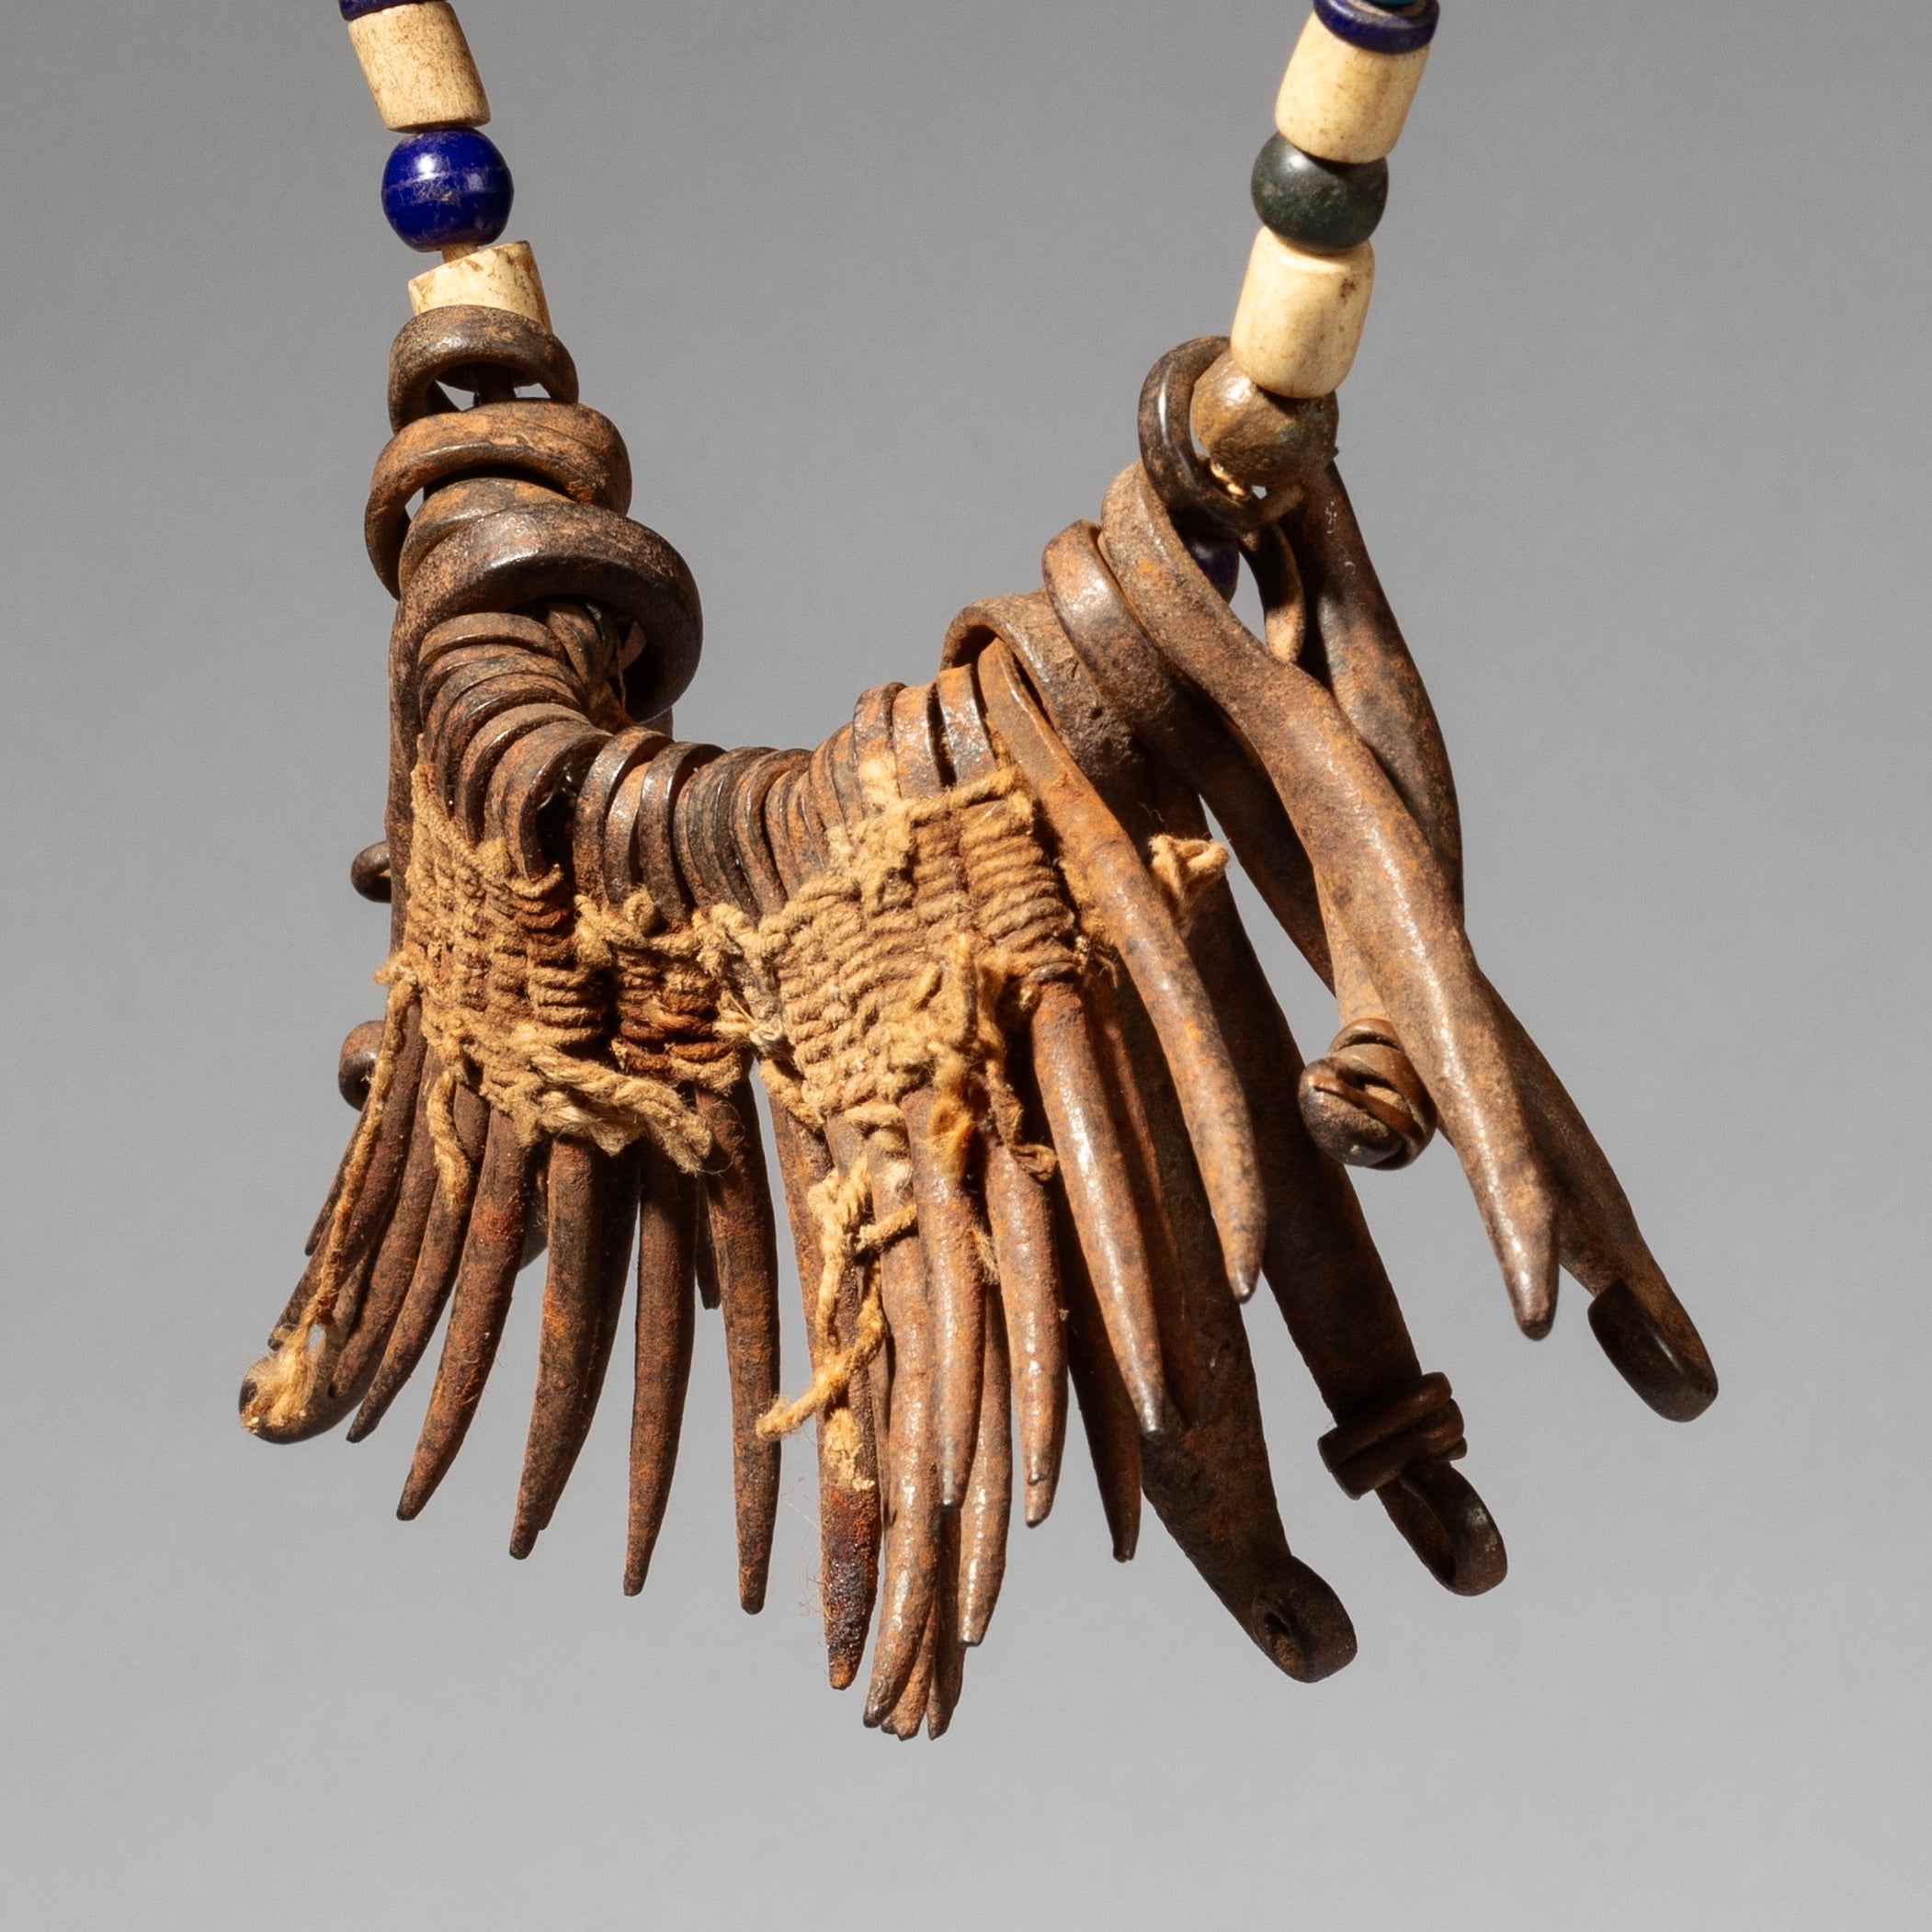 AN ARTISTIC IRON CURRENCY NECKLACE FROM KIRDI TRIBE CAMEROON W.AFRICA ( No 2290)